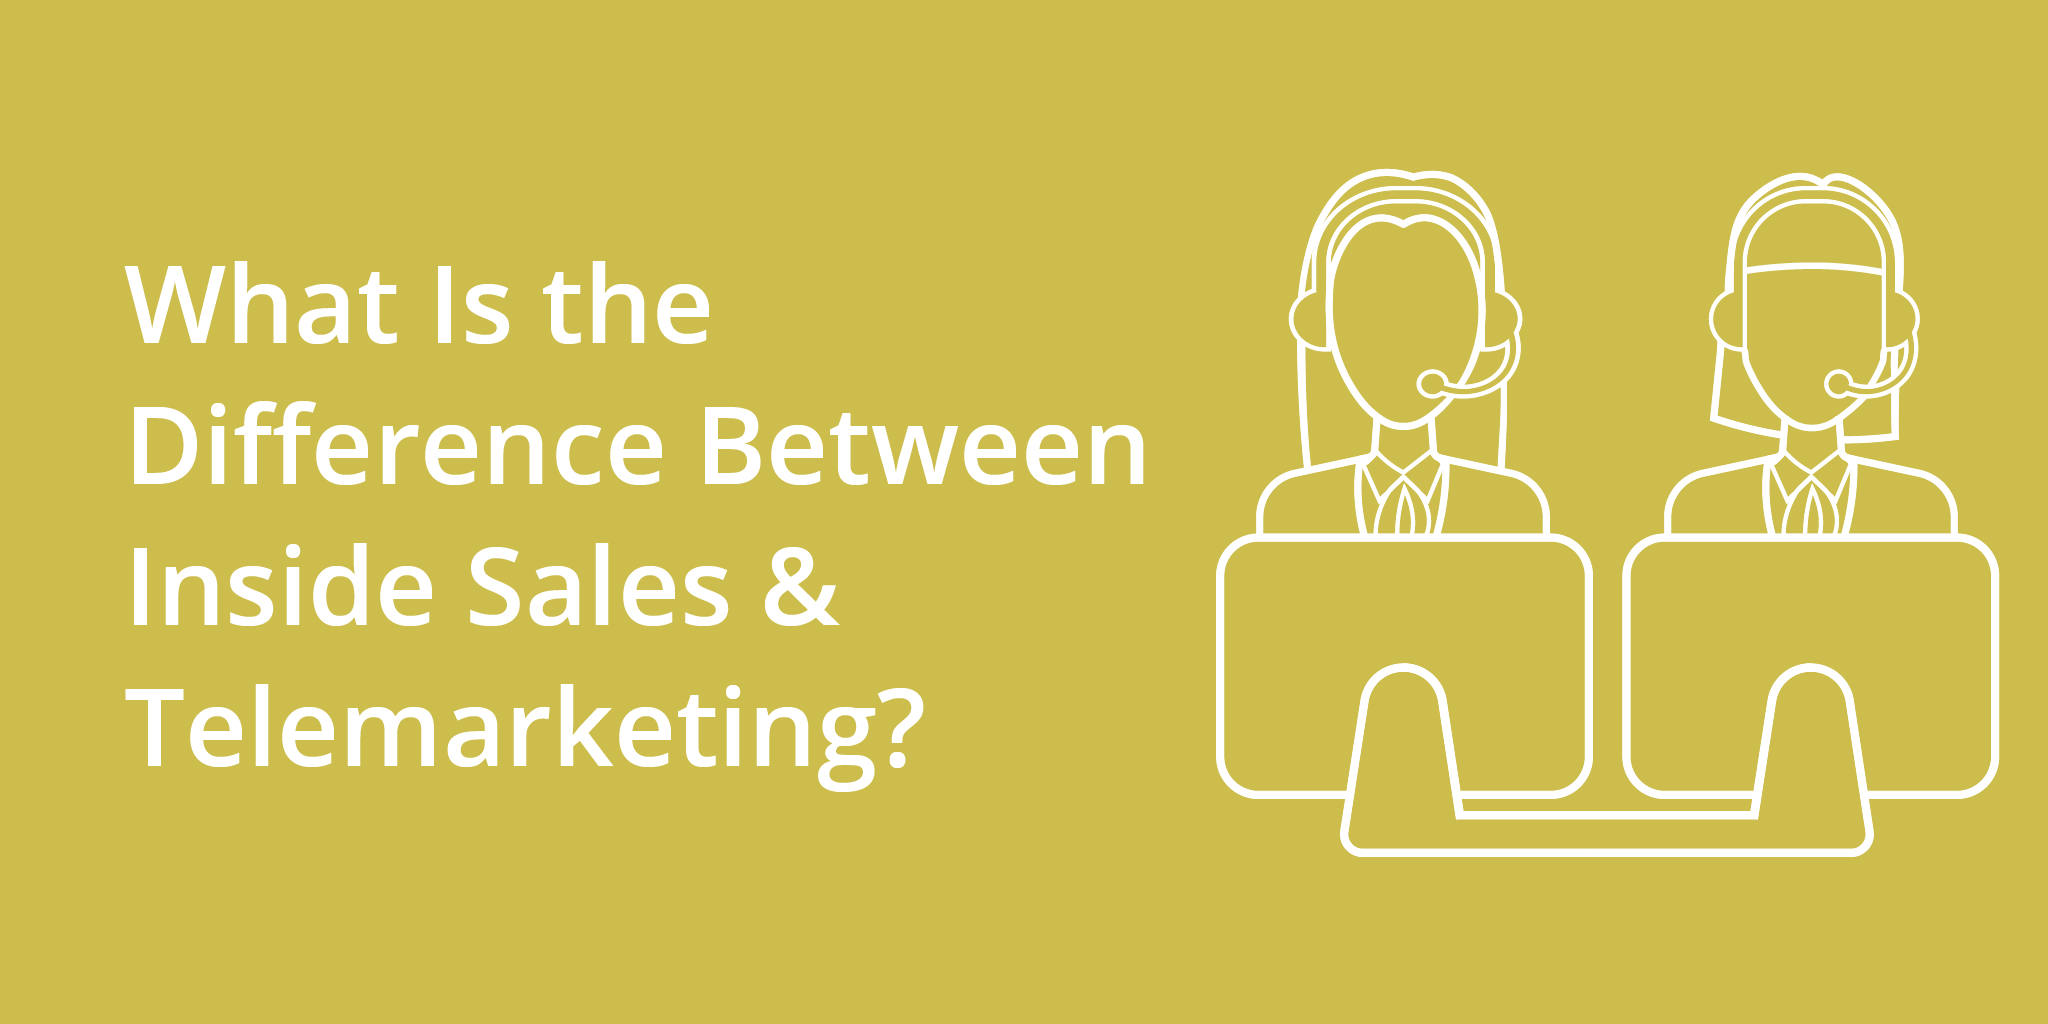 What Is the Difference Between Inside Sales & Telemarketing? | Telephones for business